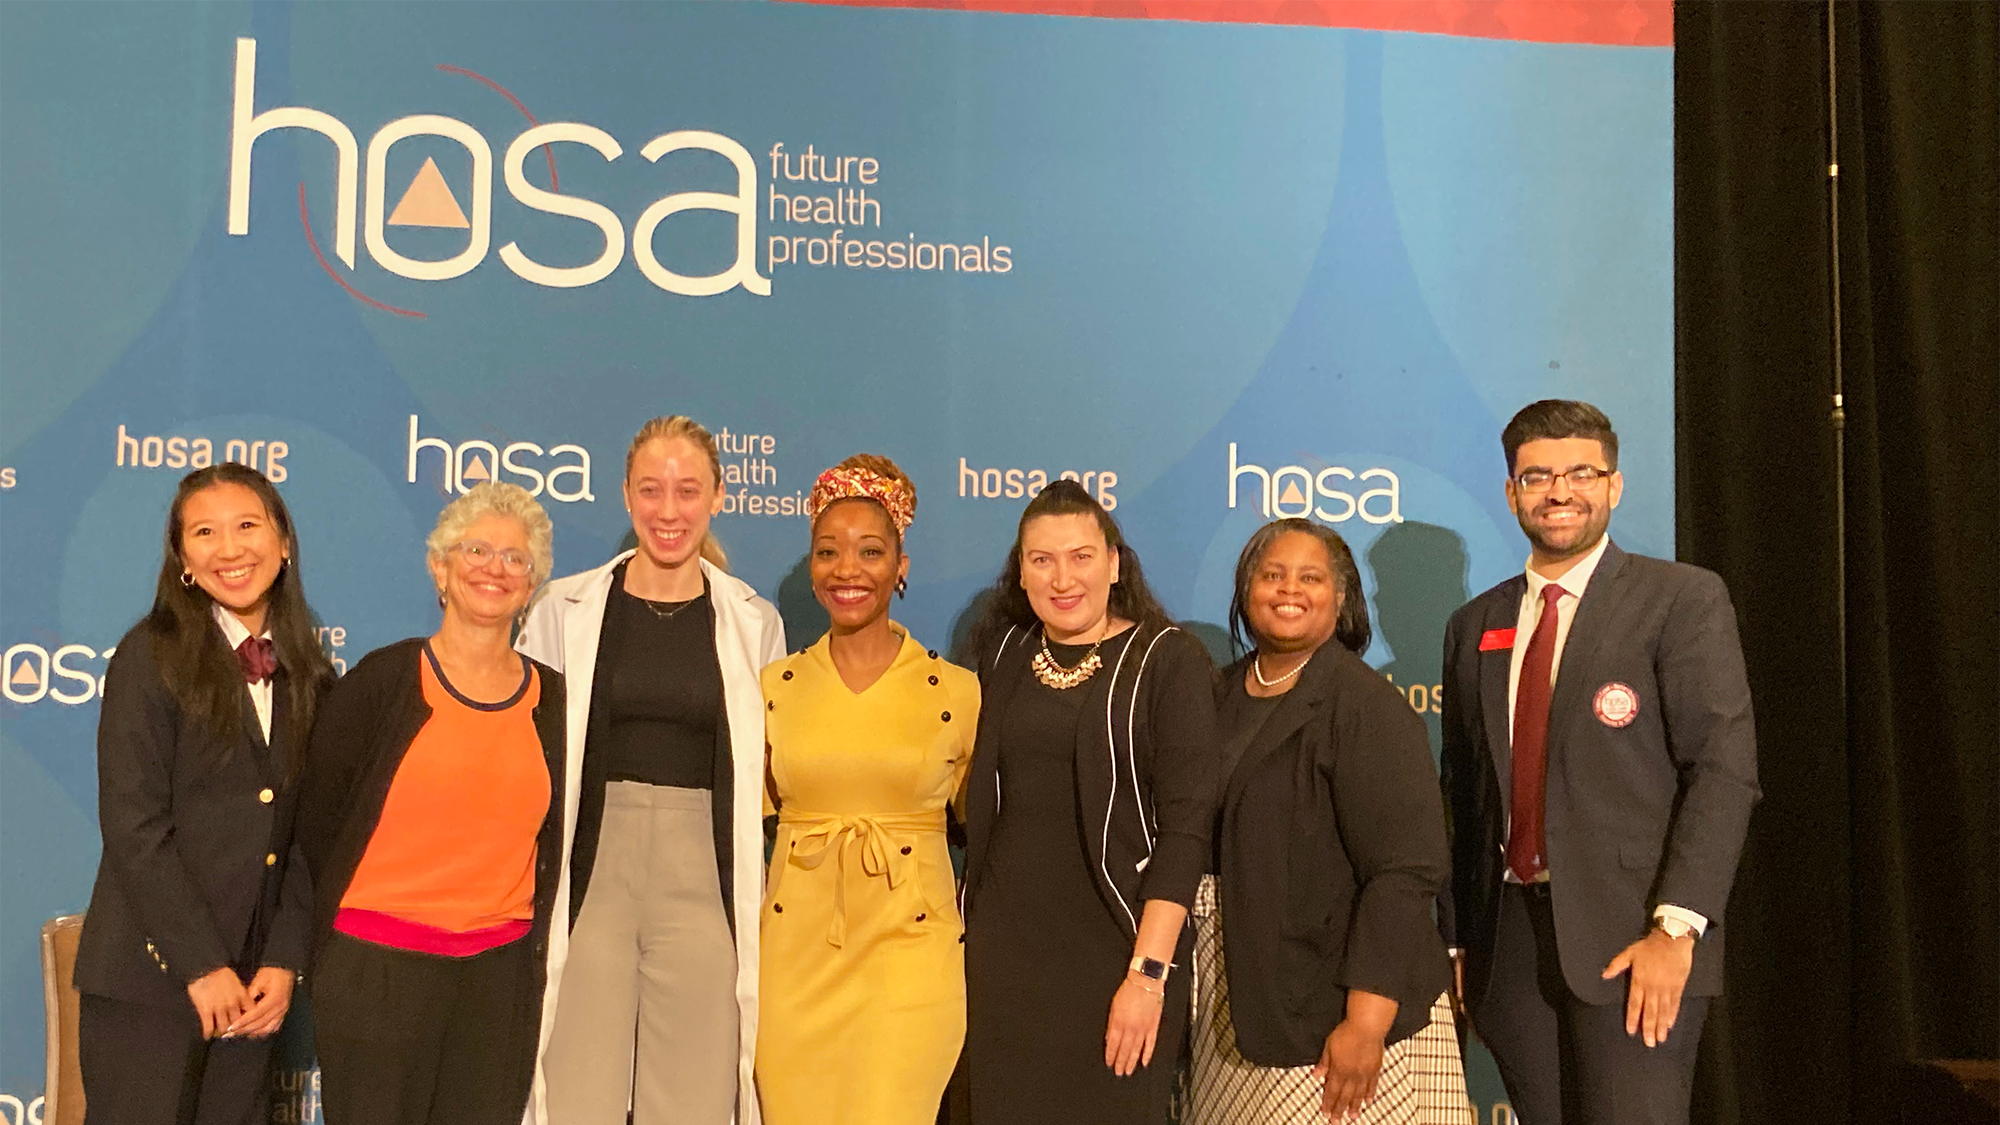 A group of people stand before a backdrop with the HOSA logo